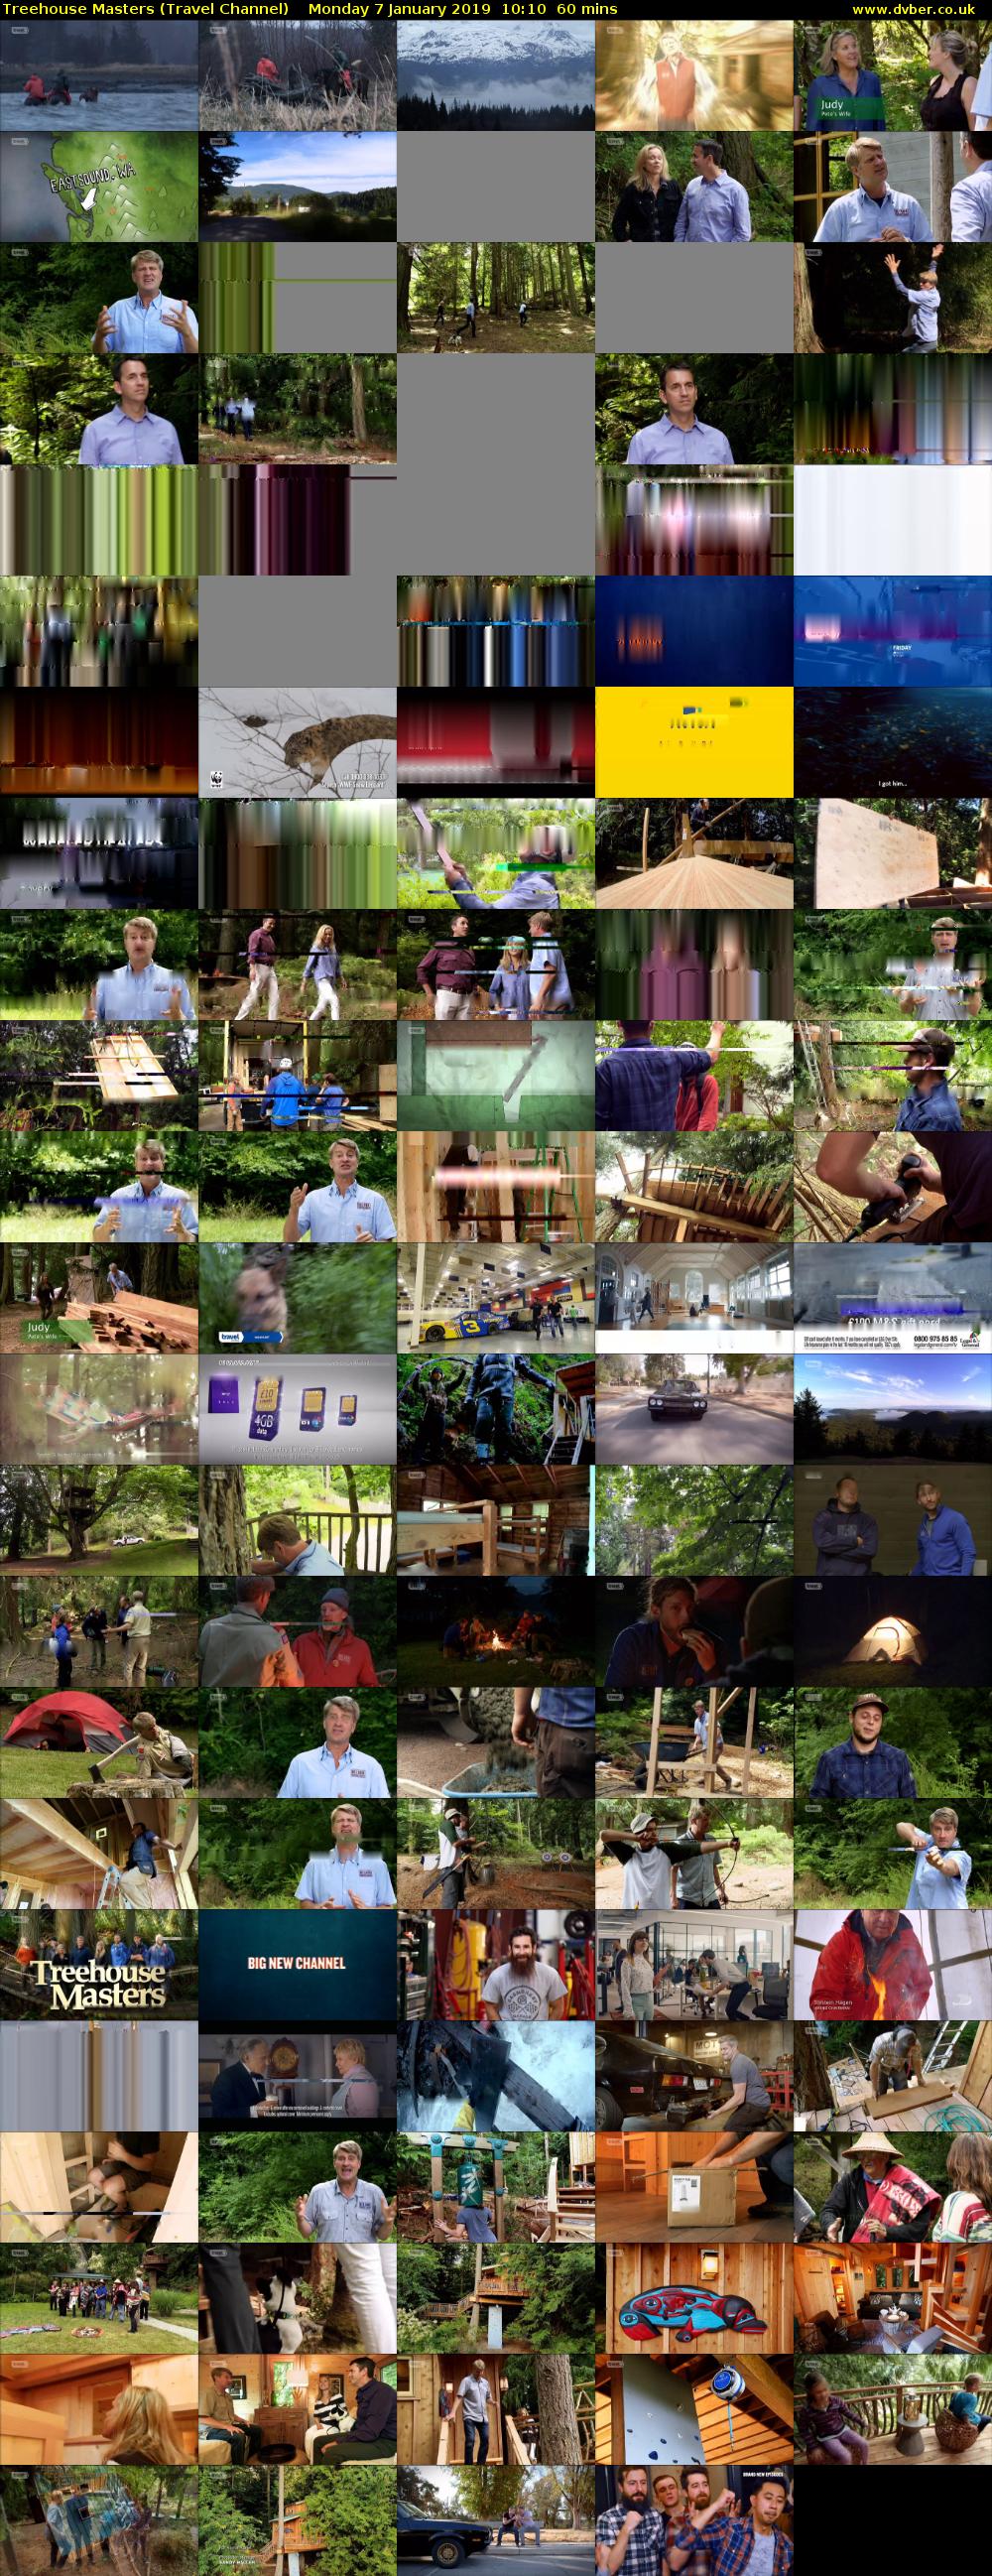 Treehouse Masters (Travel Channel) Monday 7 January 2019 10:10 - 11:10